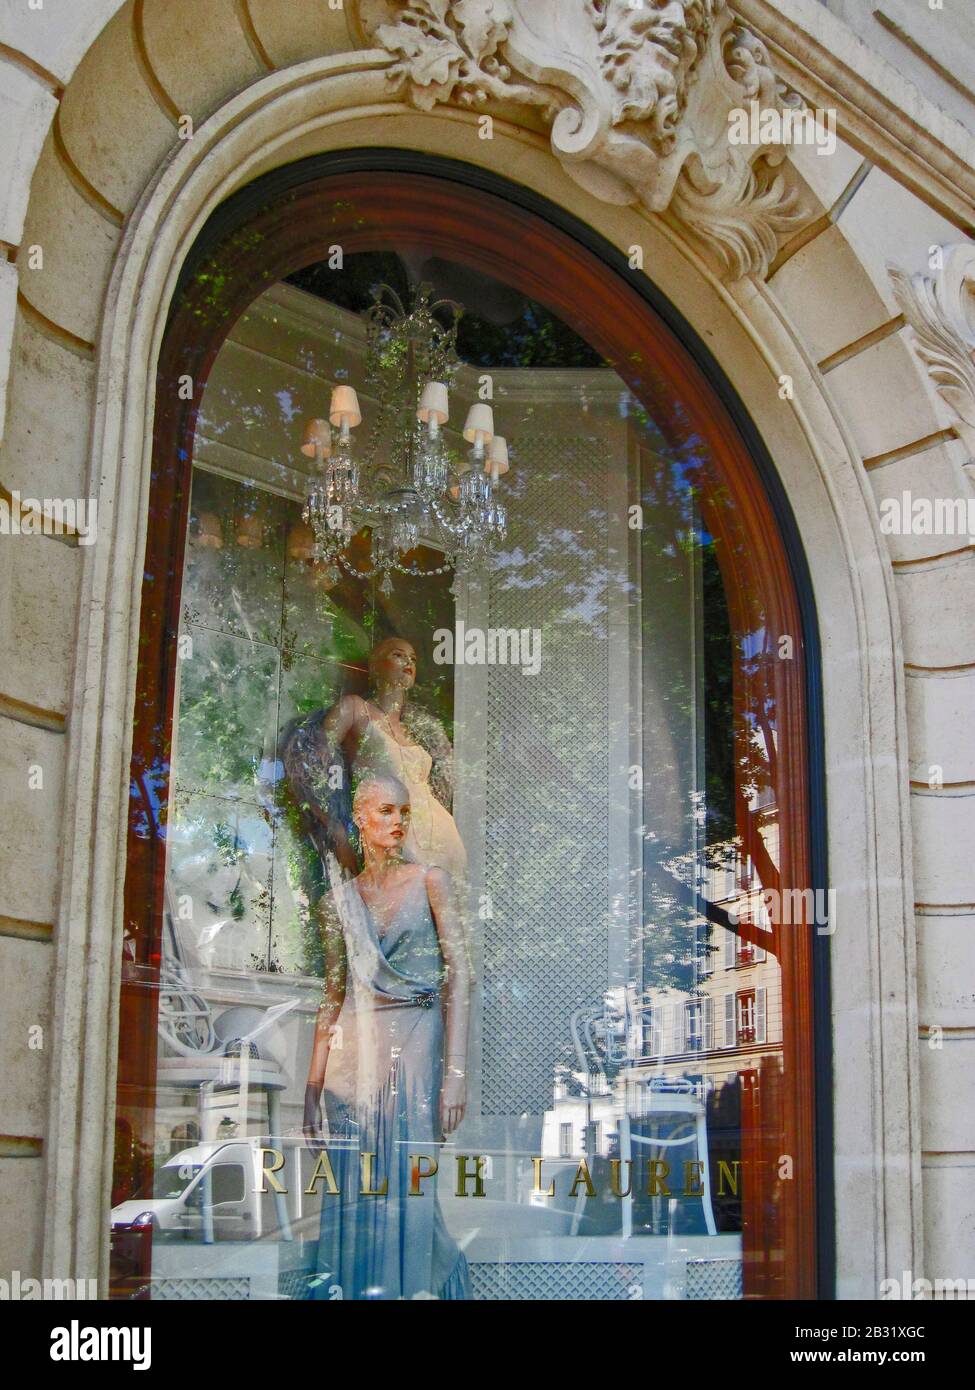 The Ralph Lauren flagship store in Paris reflects the style that Parisians accept as equal to their standards. Stock Photo